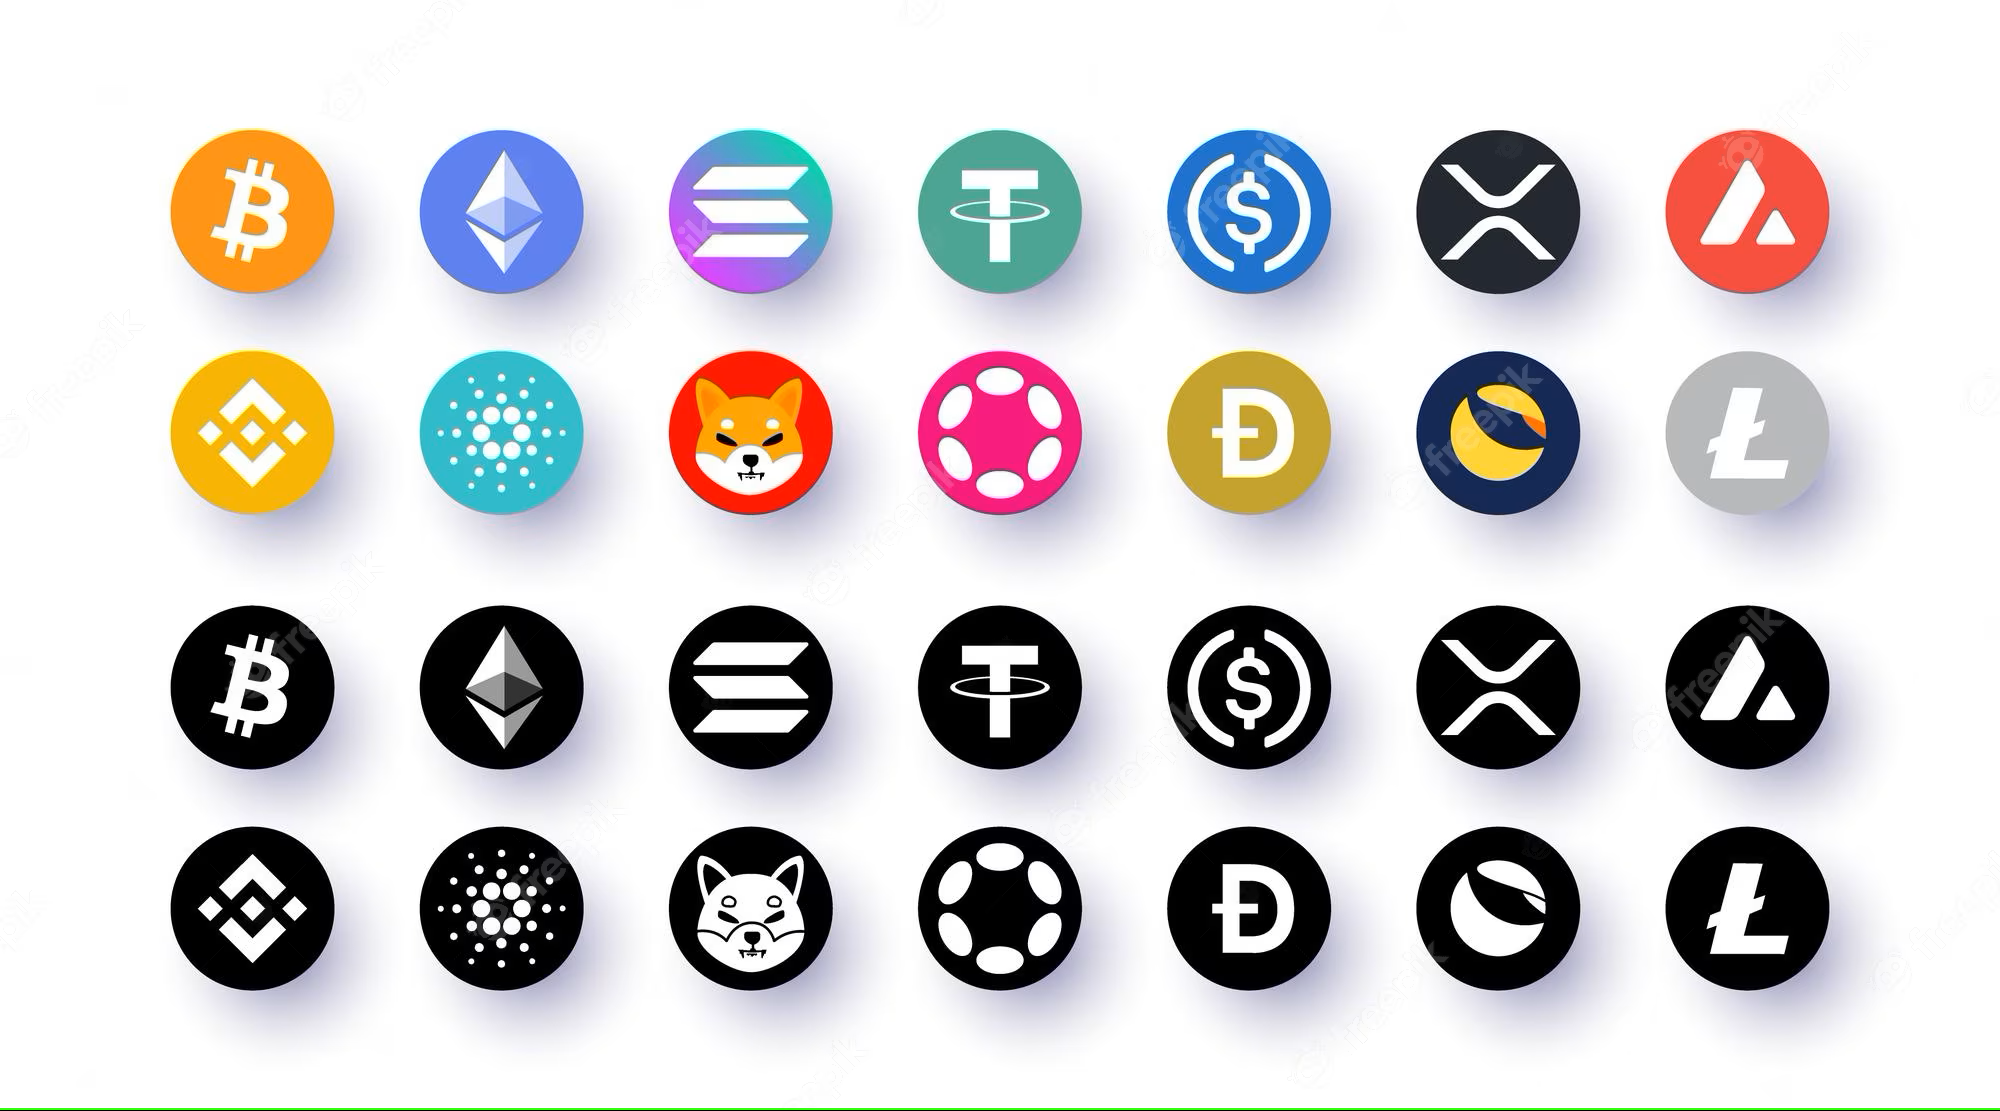 Some popular cryptocurrency